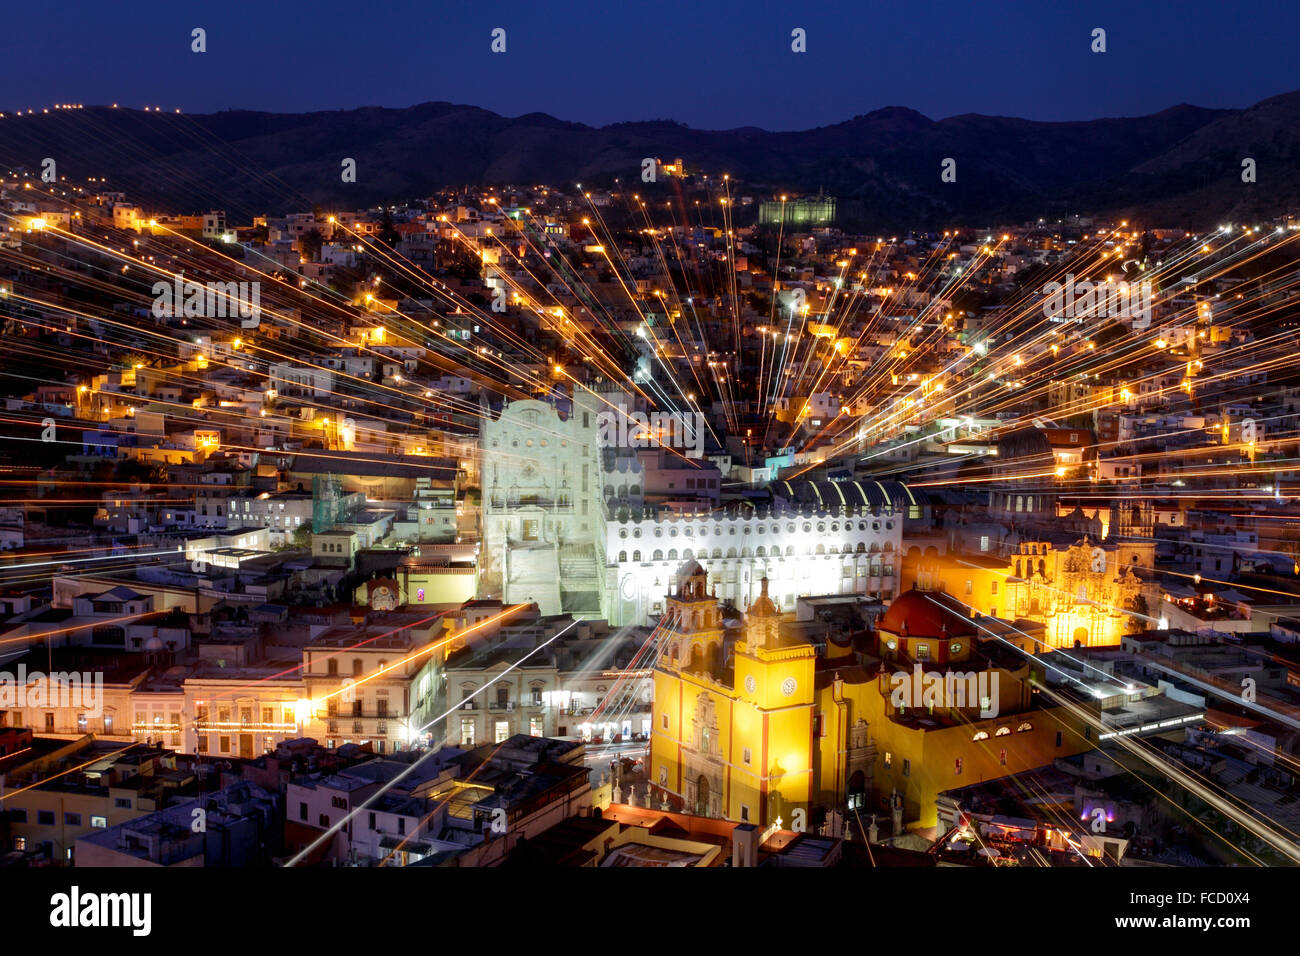 University and cathedral of colonial Guanajuato, Mexico. Stock Photo